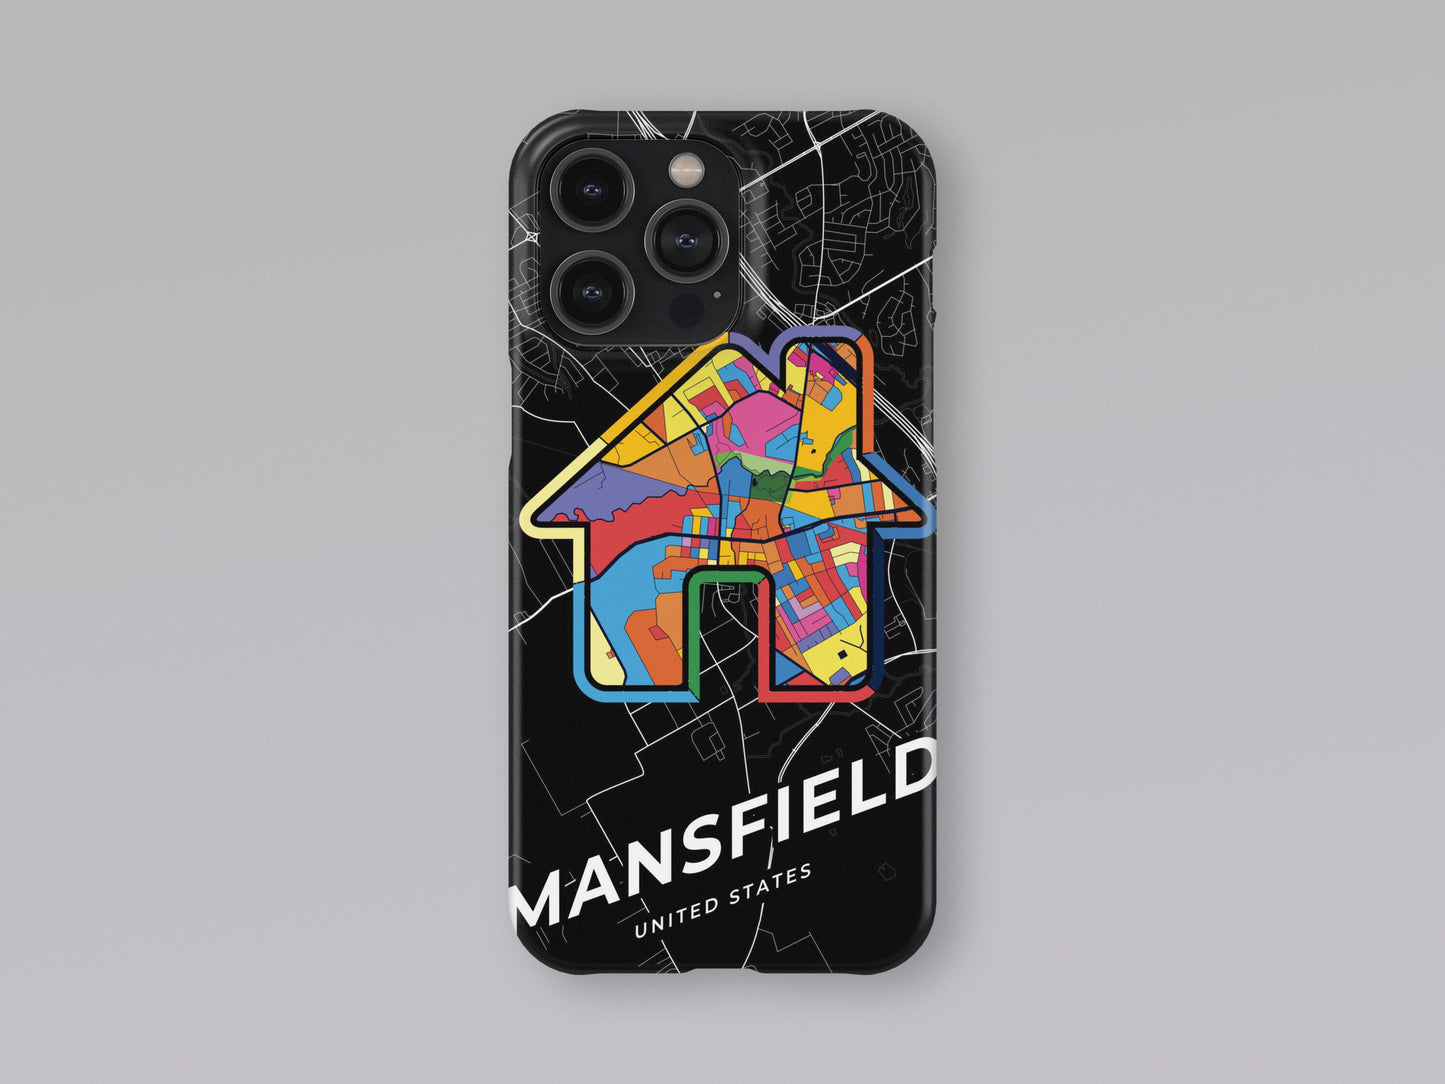 Mansfield Texas slim phone case with colorful icon. Birthday, wedding or housewarming gift. Couple match cases. 3